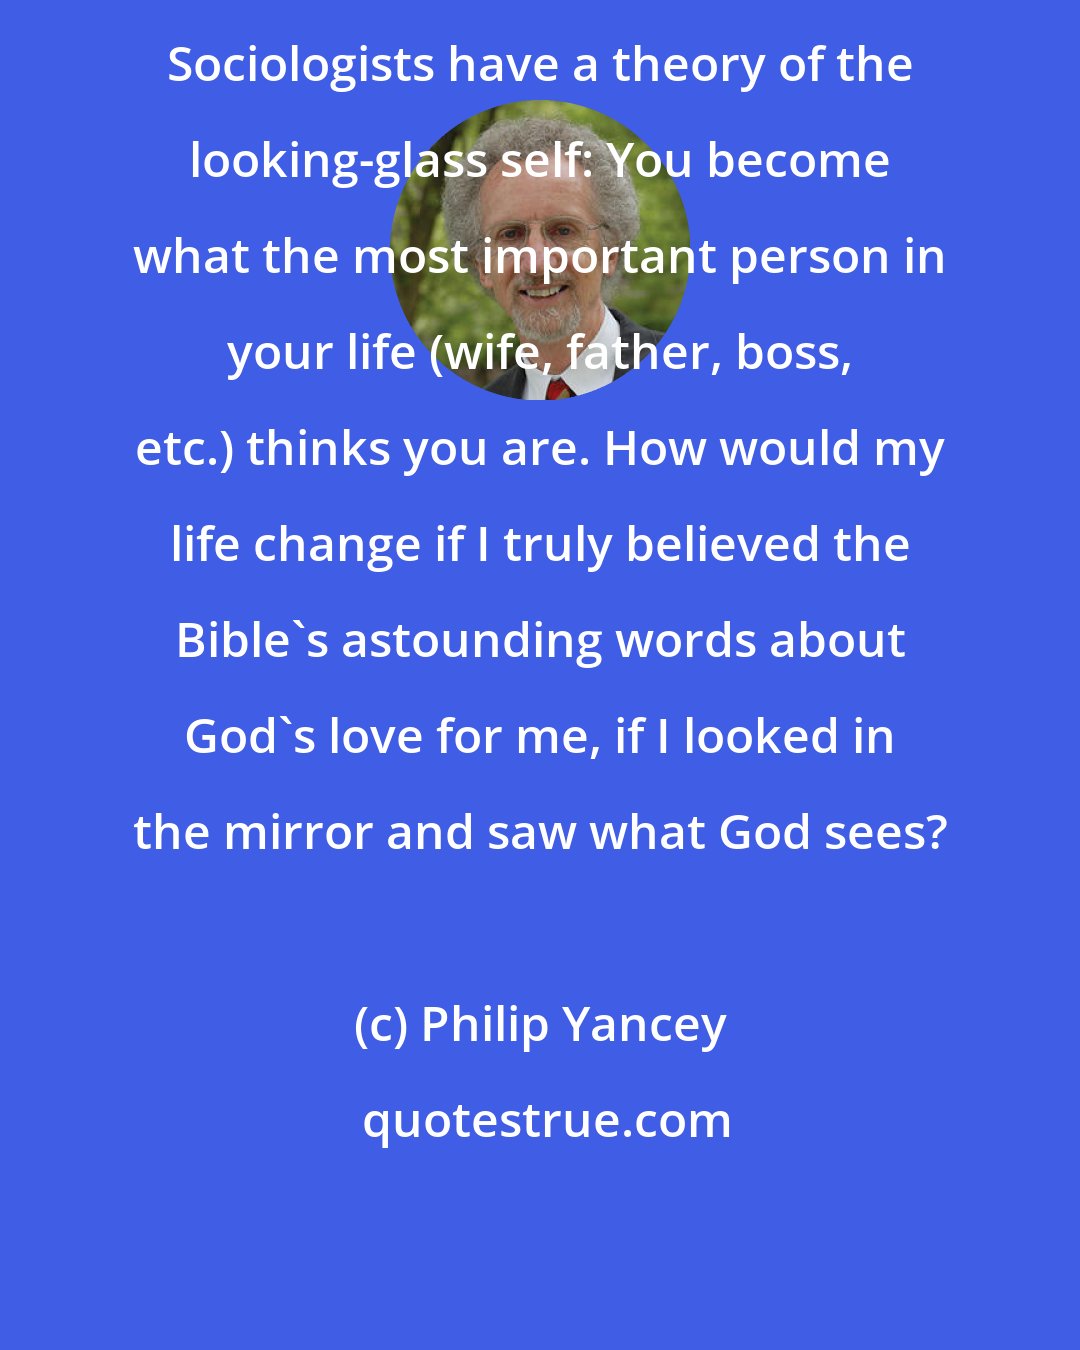 Philip Yancey: Sociologists have a theory of the looking-glass self: You become what the most important person in your life (wife, father, boss, etc.) thinks you are. How would my life change if I truly believed the Bible's astounding words about God's love for me, if I looked in the mirror and saw what God sees?